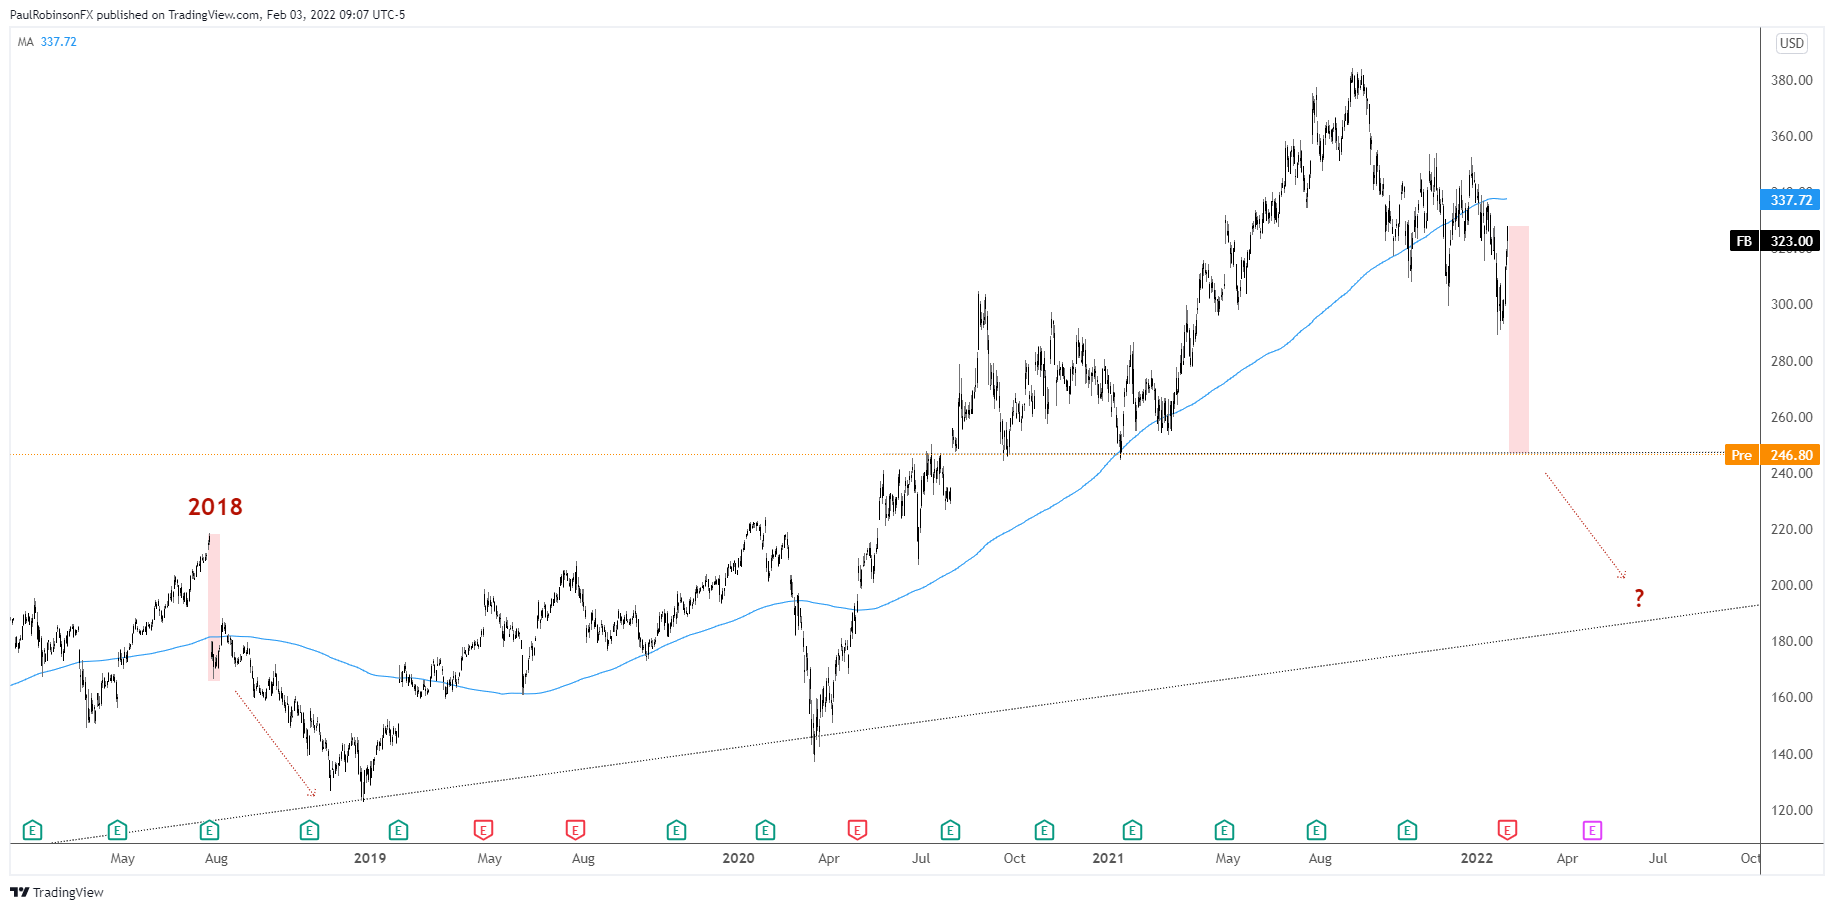 Graph of Facebook (FB) daily stock moment